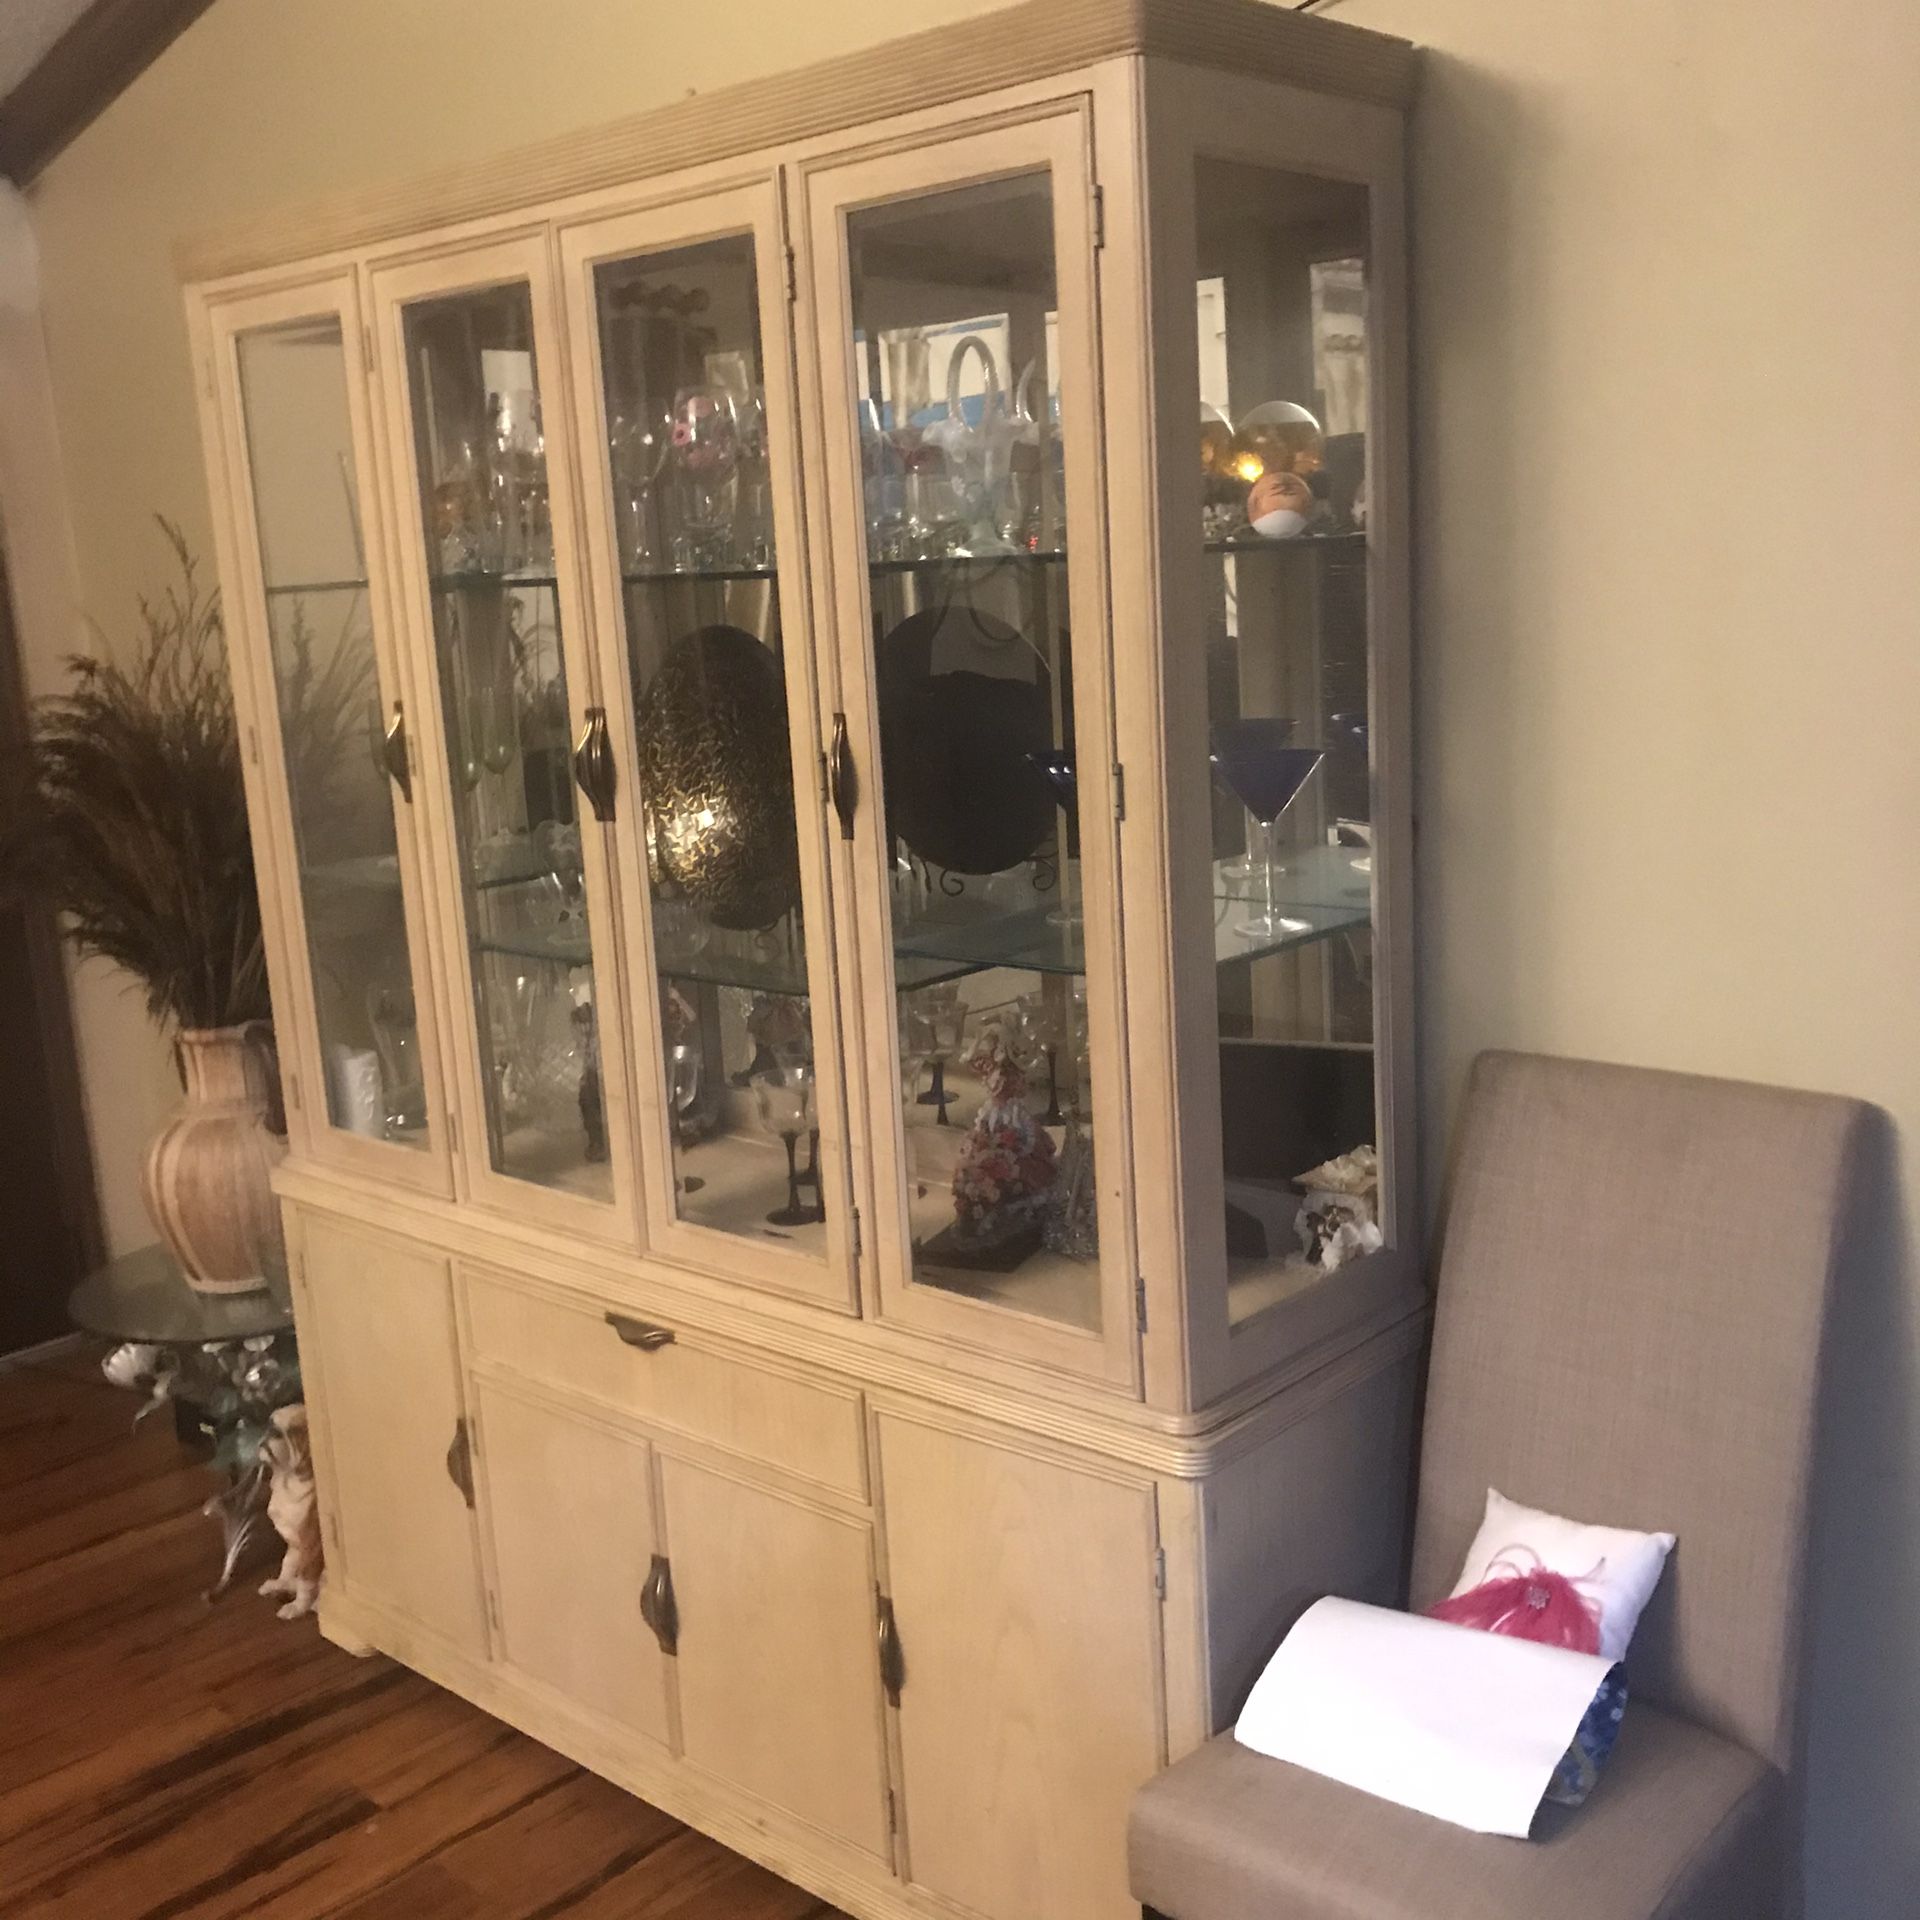 China cabinet with hutch